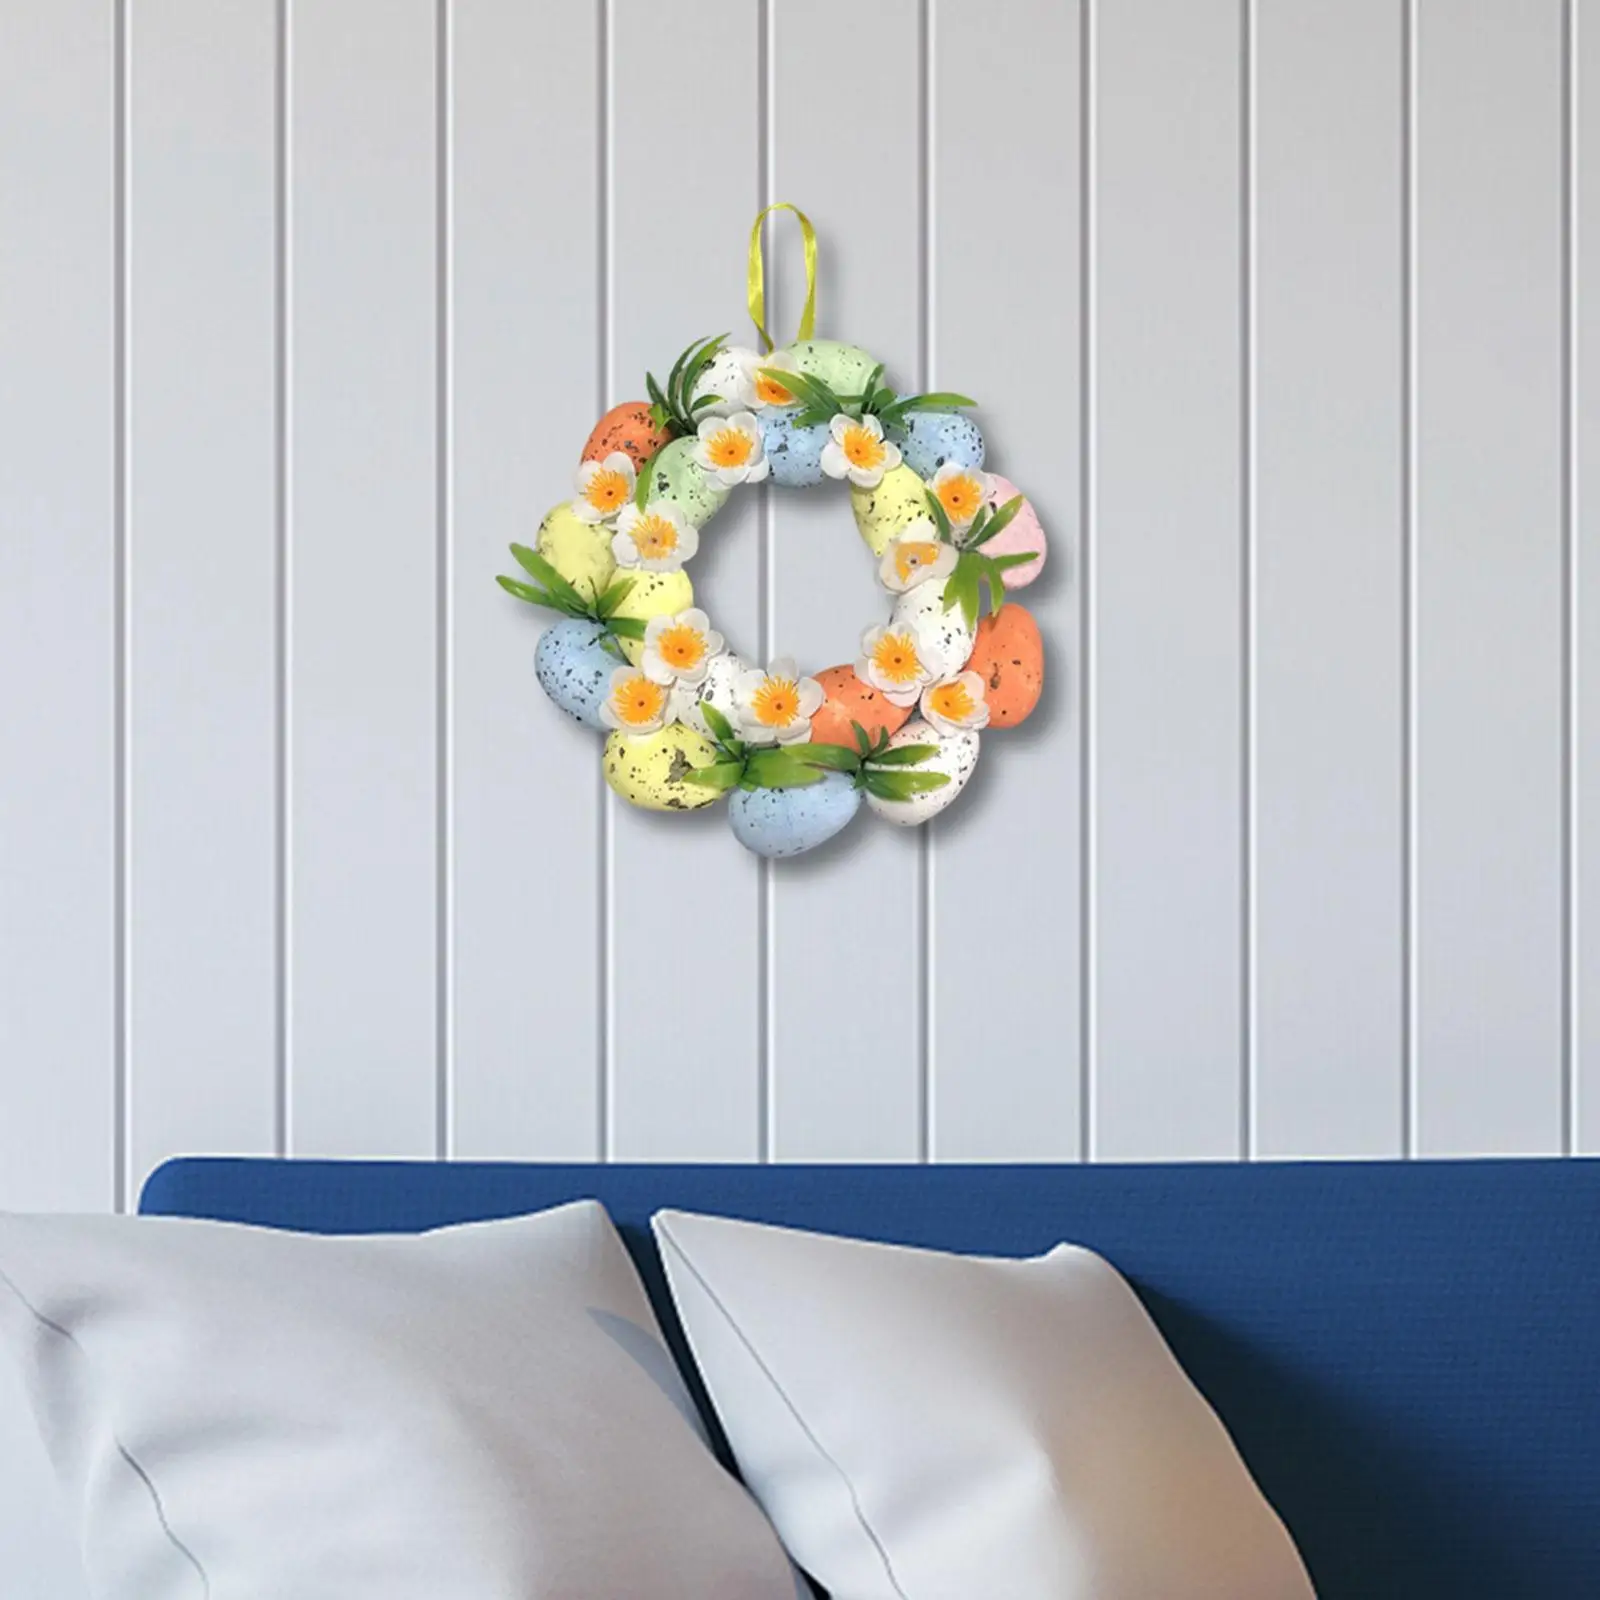 7.87inch Easter Wreath Holiday Decor with Colorful Egg Artificial Flowers Wreaths for Outside Festive Spring Summer Home Party